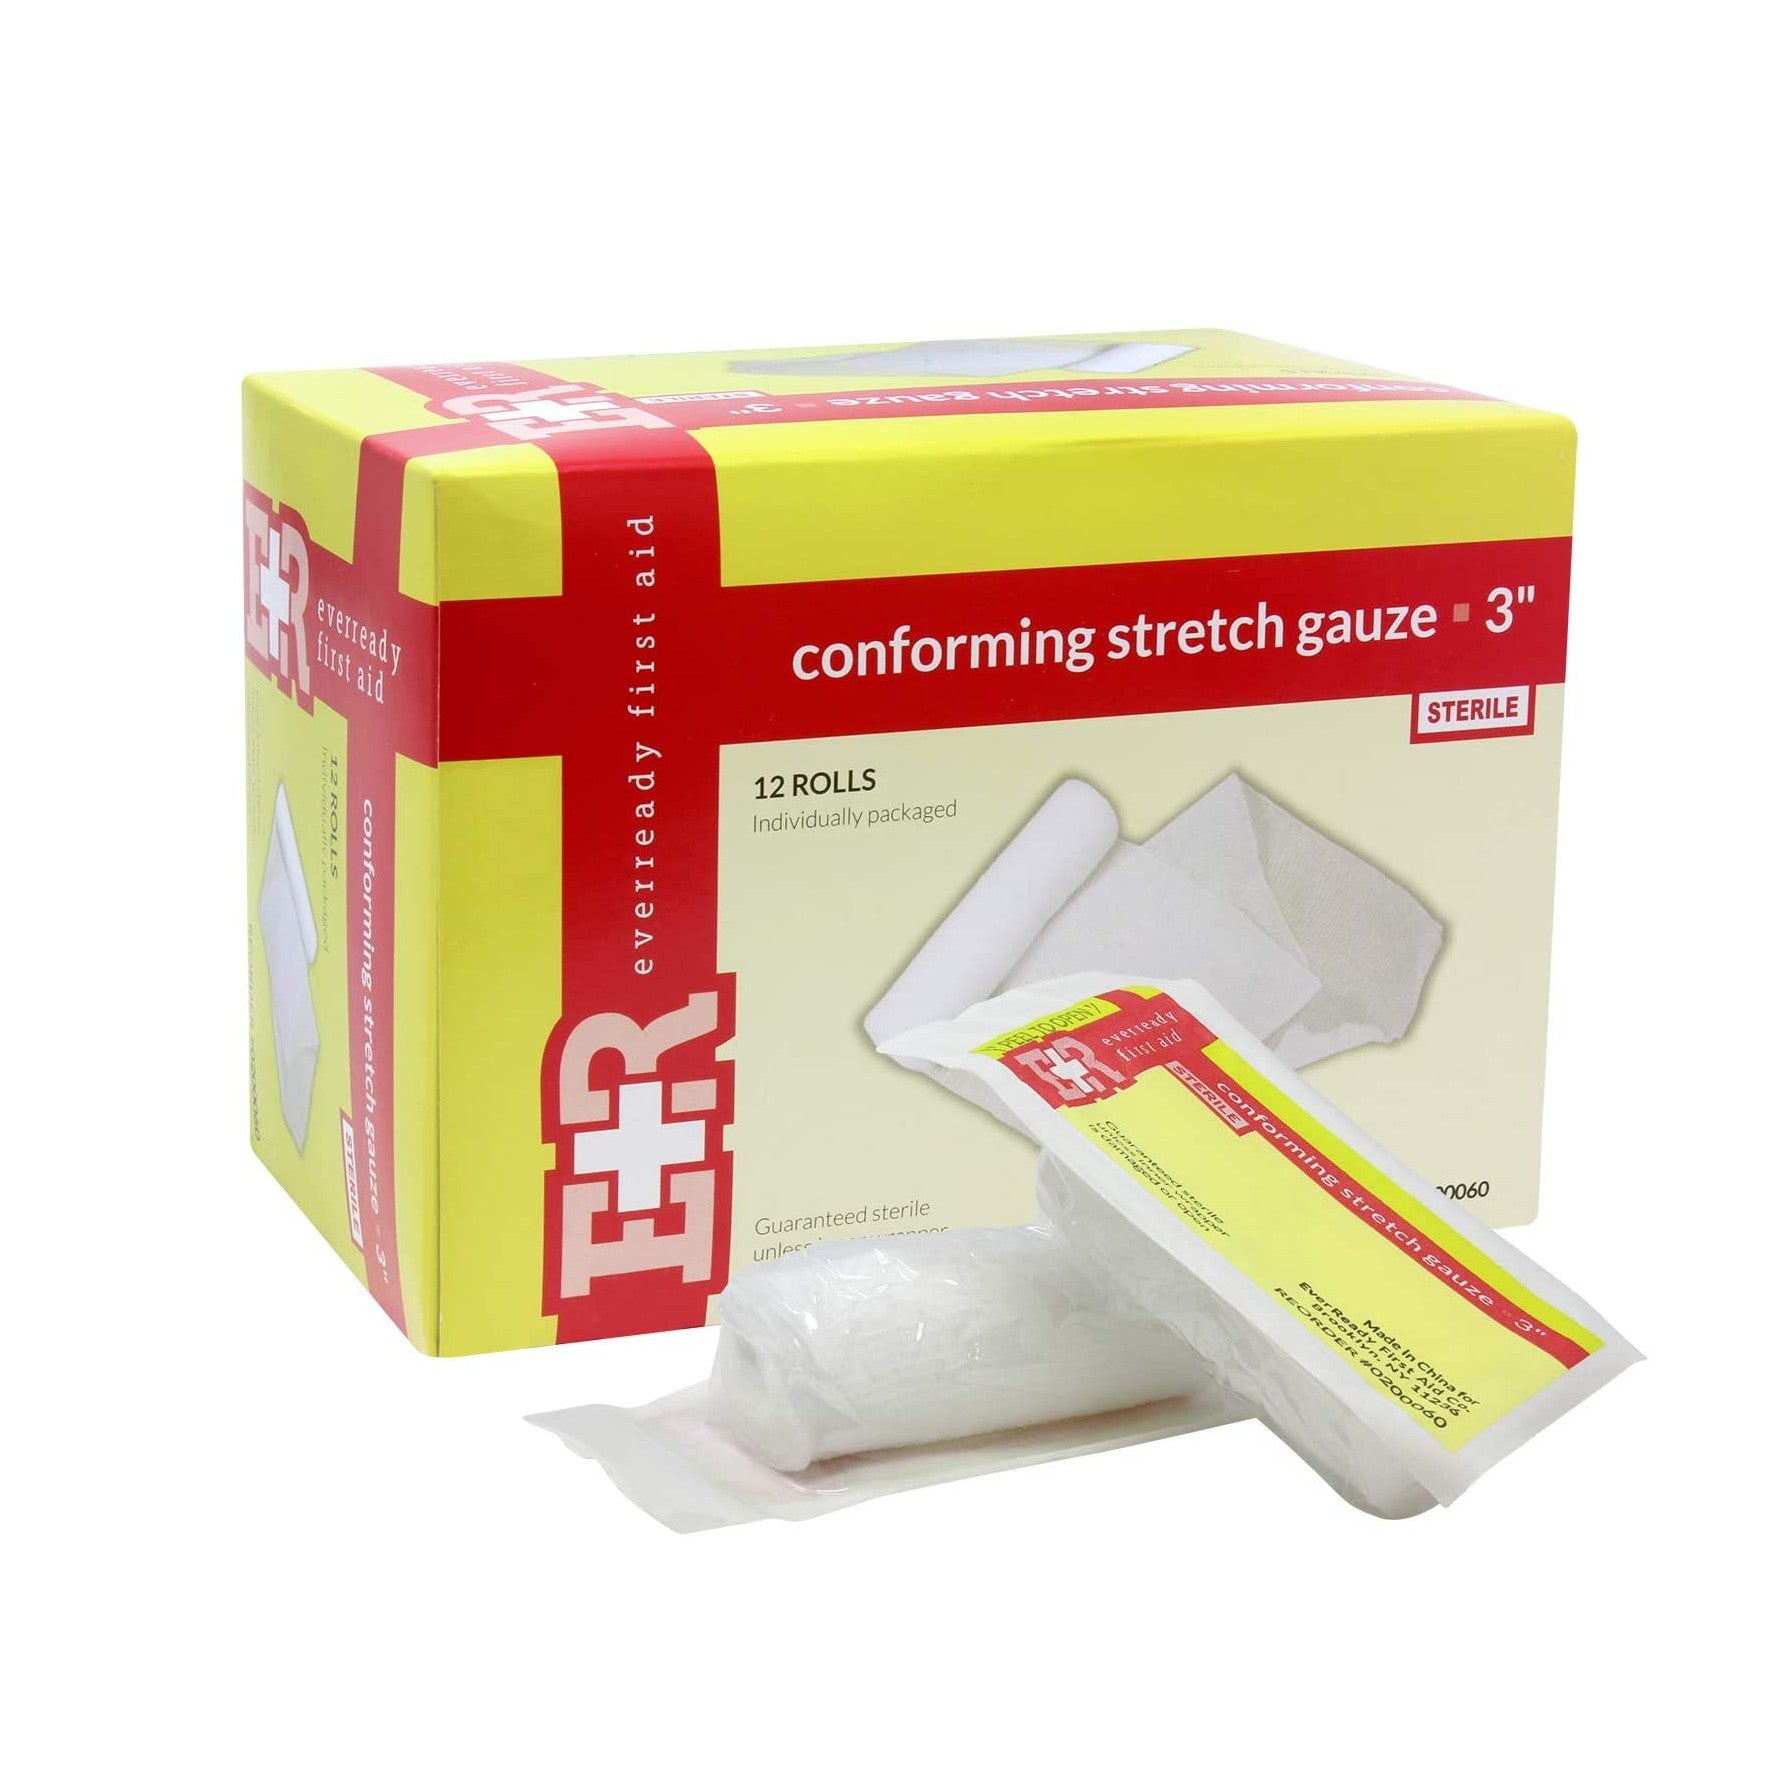 Ever Ready First Aid Sterile Conforming Gauze Roll Bandage